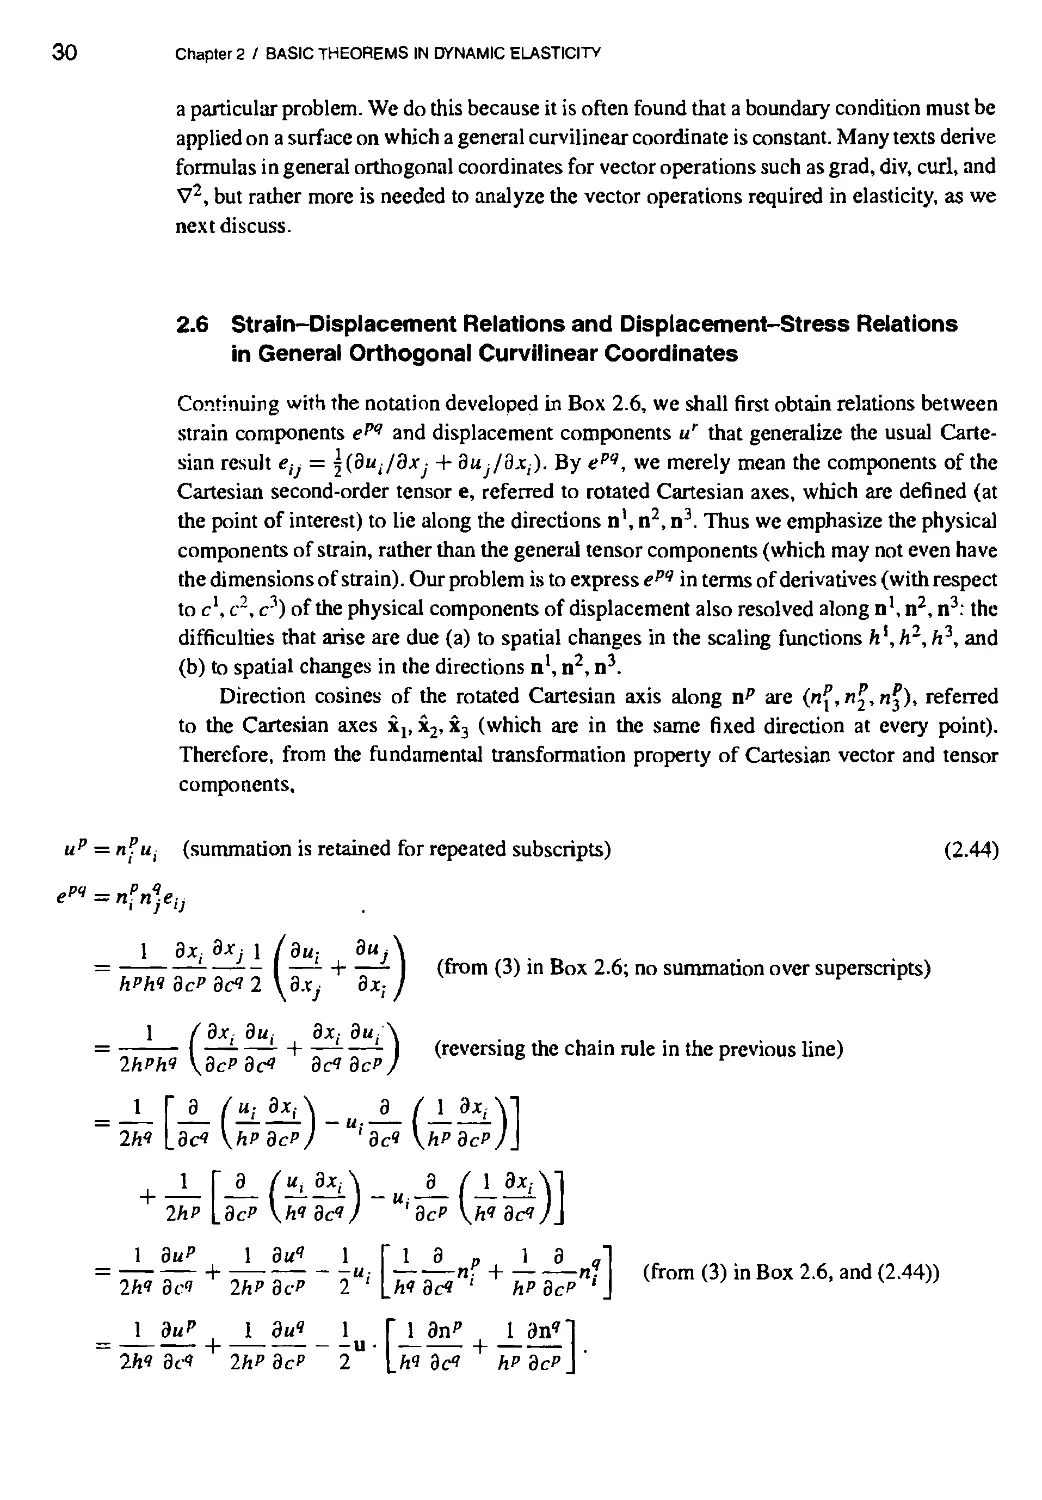 2.6 Strain-Displacement Relations and Displacement-Stress Relations in General Orthogonal Curvilinear Coordinates